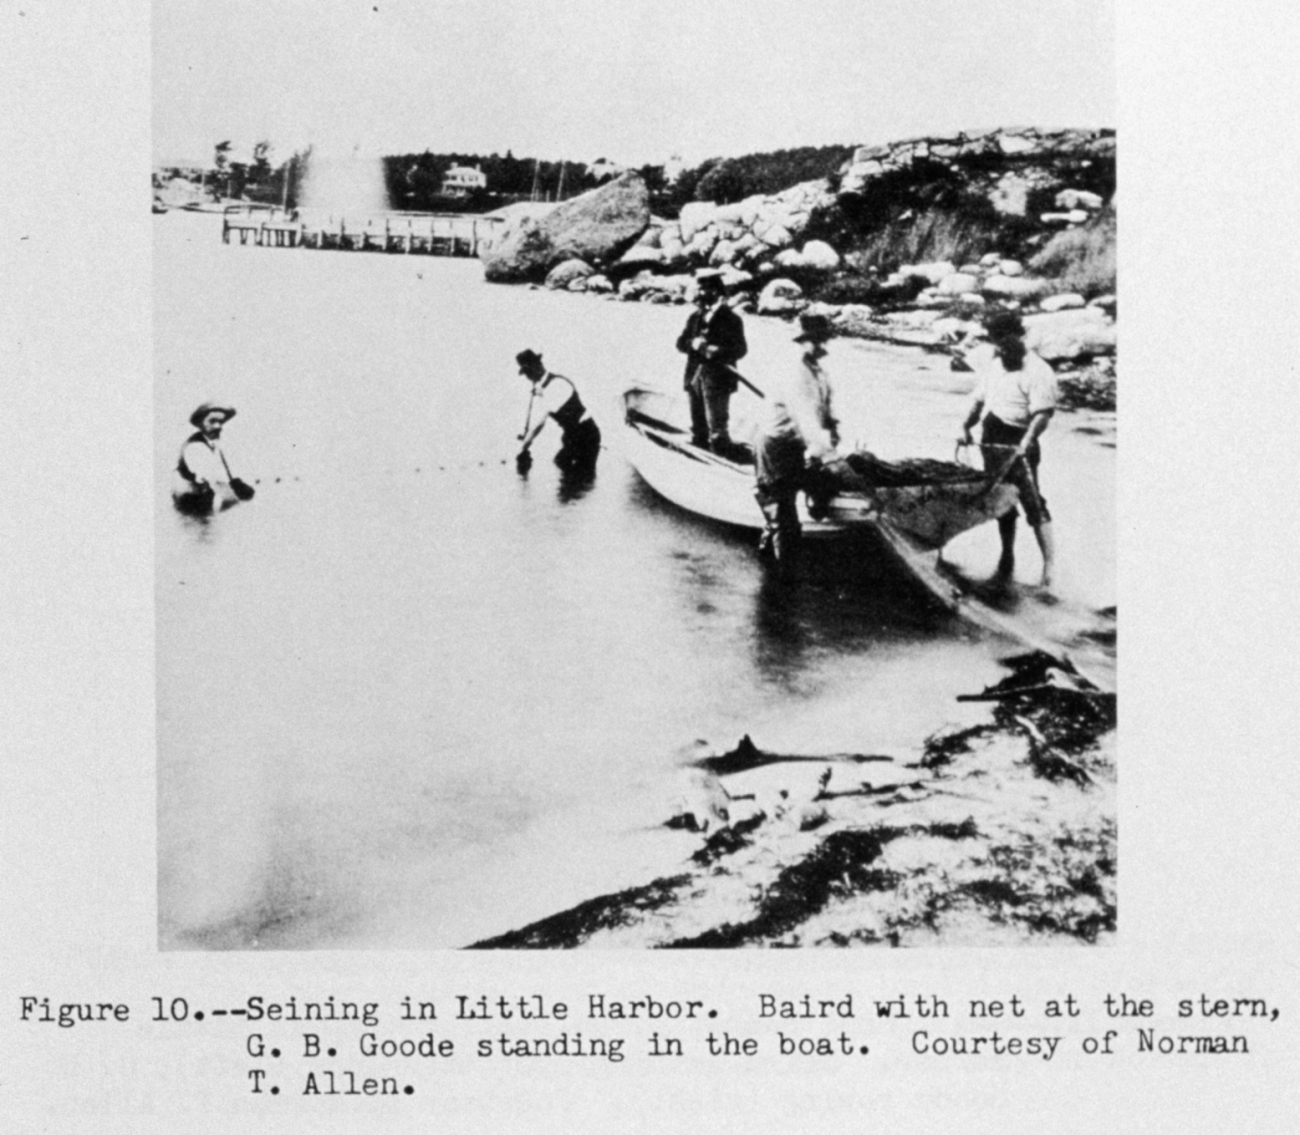 Spencer Fullerton Baird and George Brown Goode seining in Little Harbor